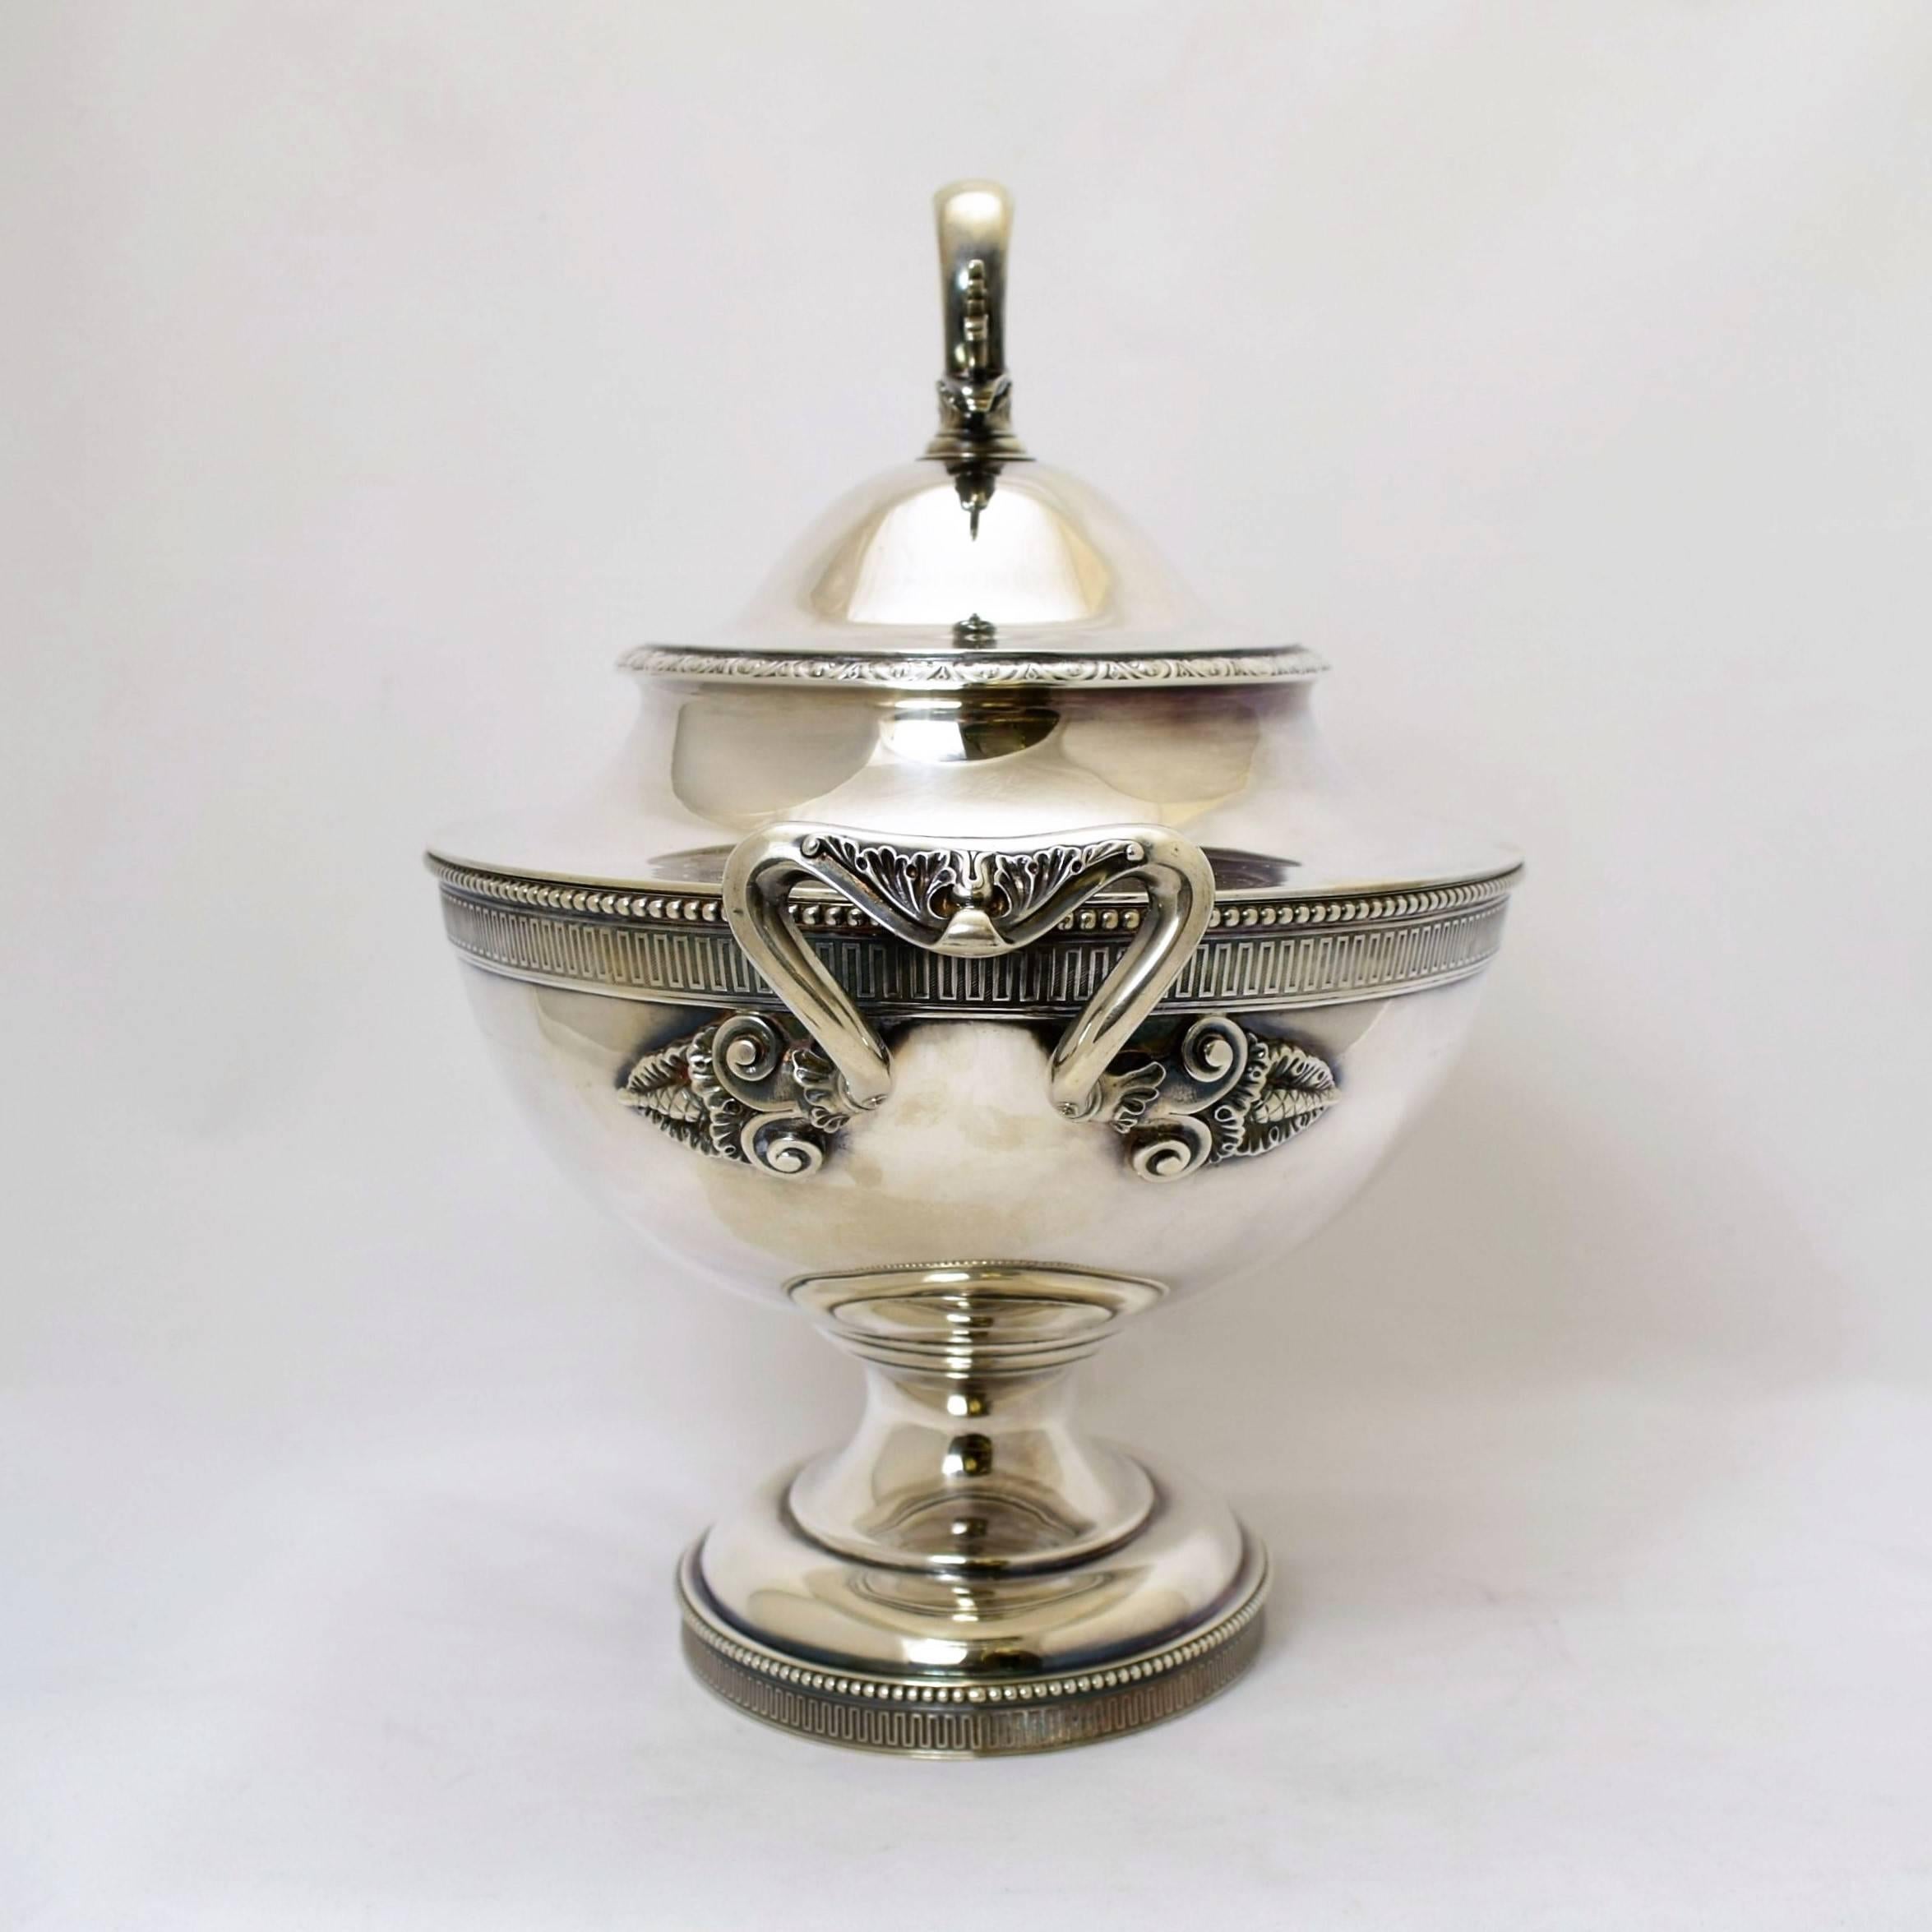 Being offered is a circa 1875 sterling silver tureen by Tiffany & Co. of New York. Large serving piece in the neoclassical style, adorned with egg and dart motifs on the body and pedestal base. Dimensions: 16.5 inches from handle to handle, 13